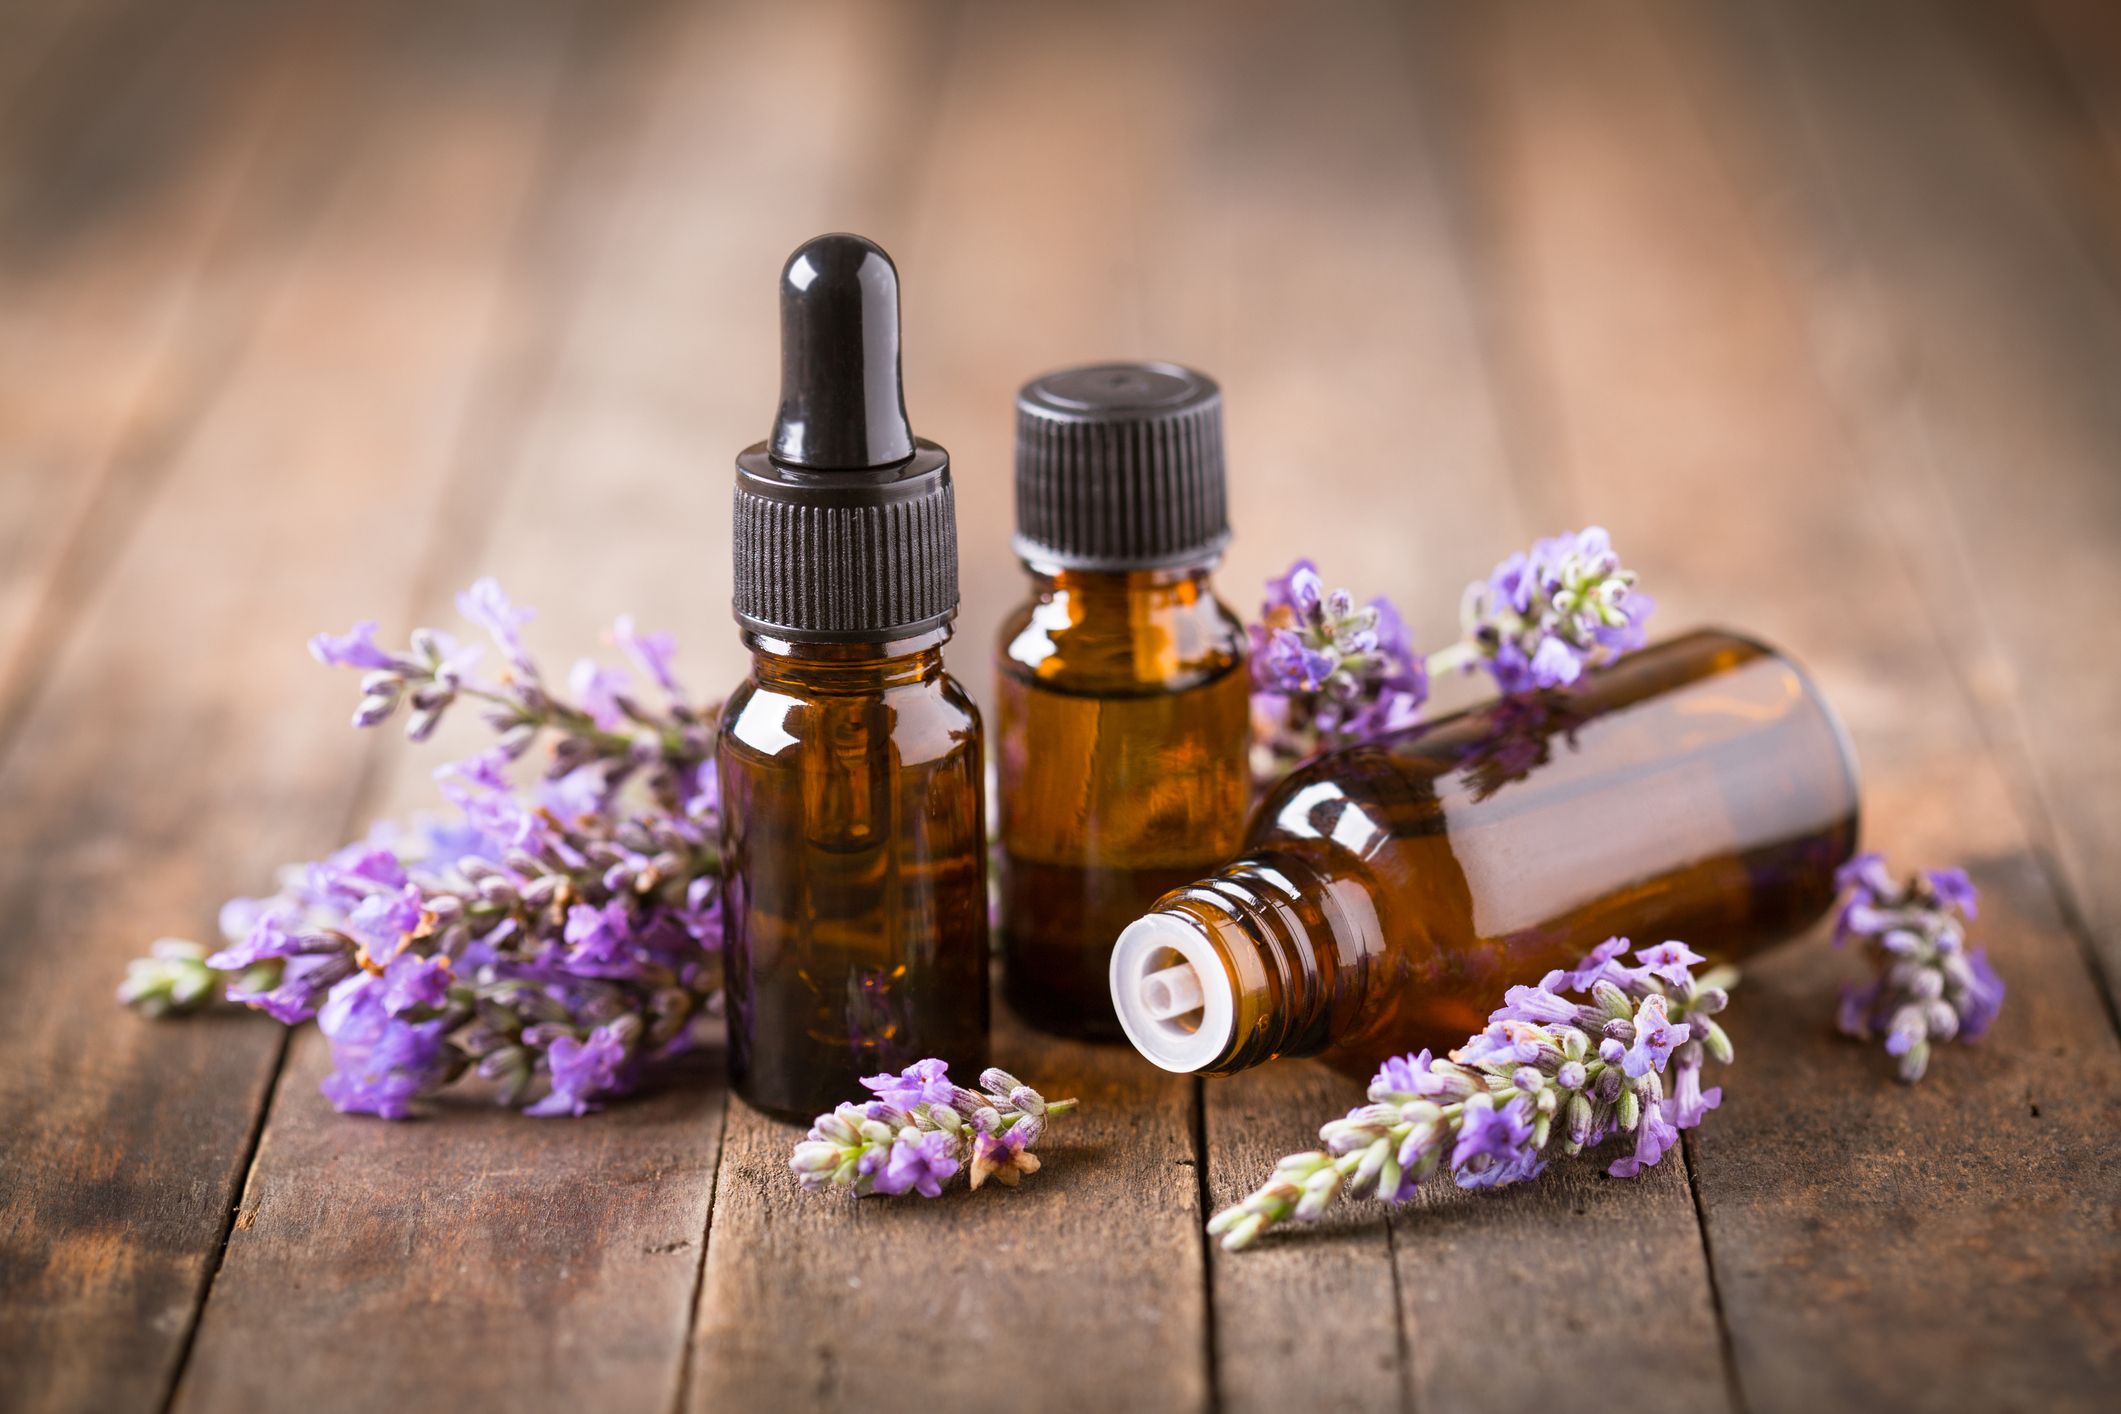 Essential Oils - Their Formulations For The Control Of Curculionidae Pests